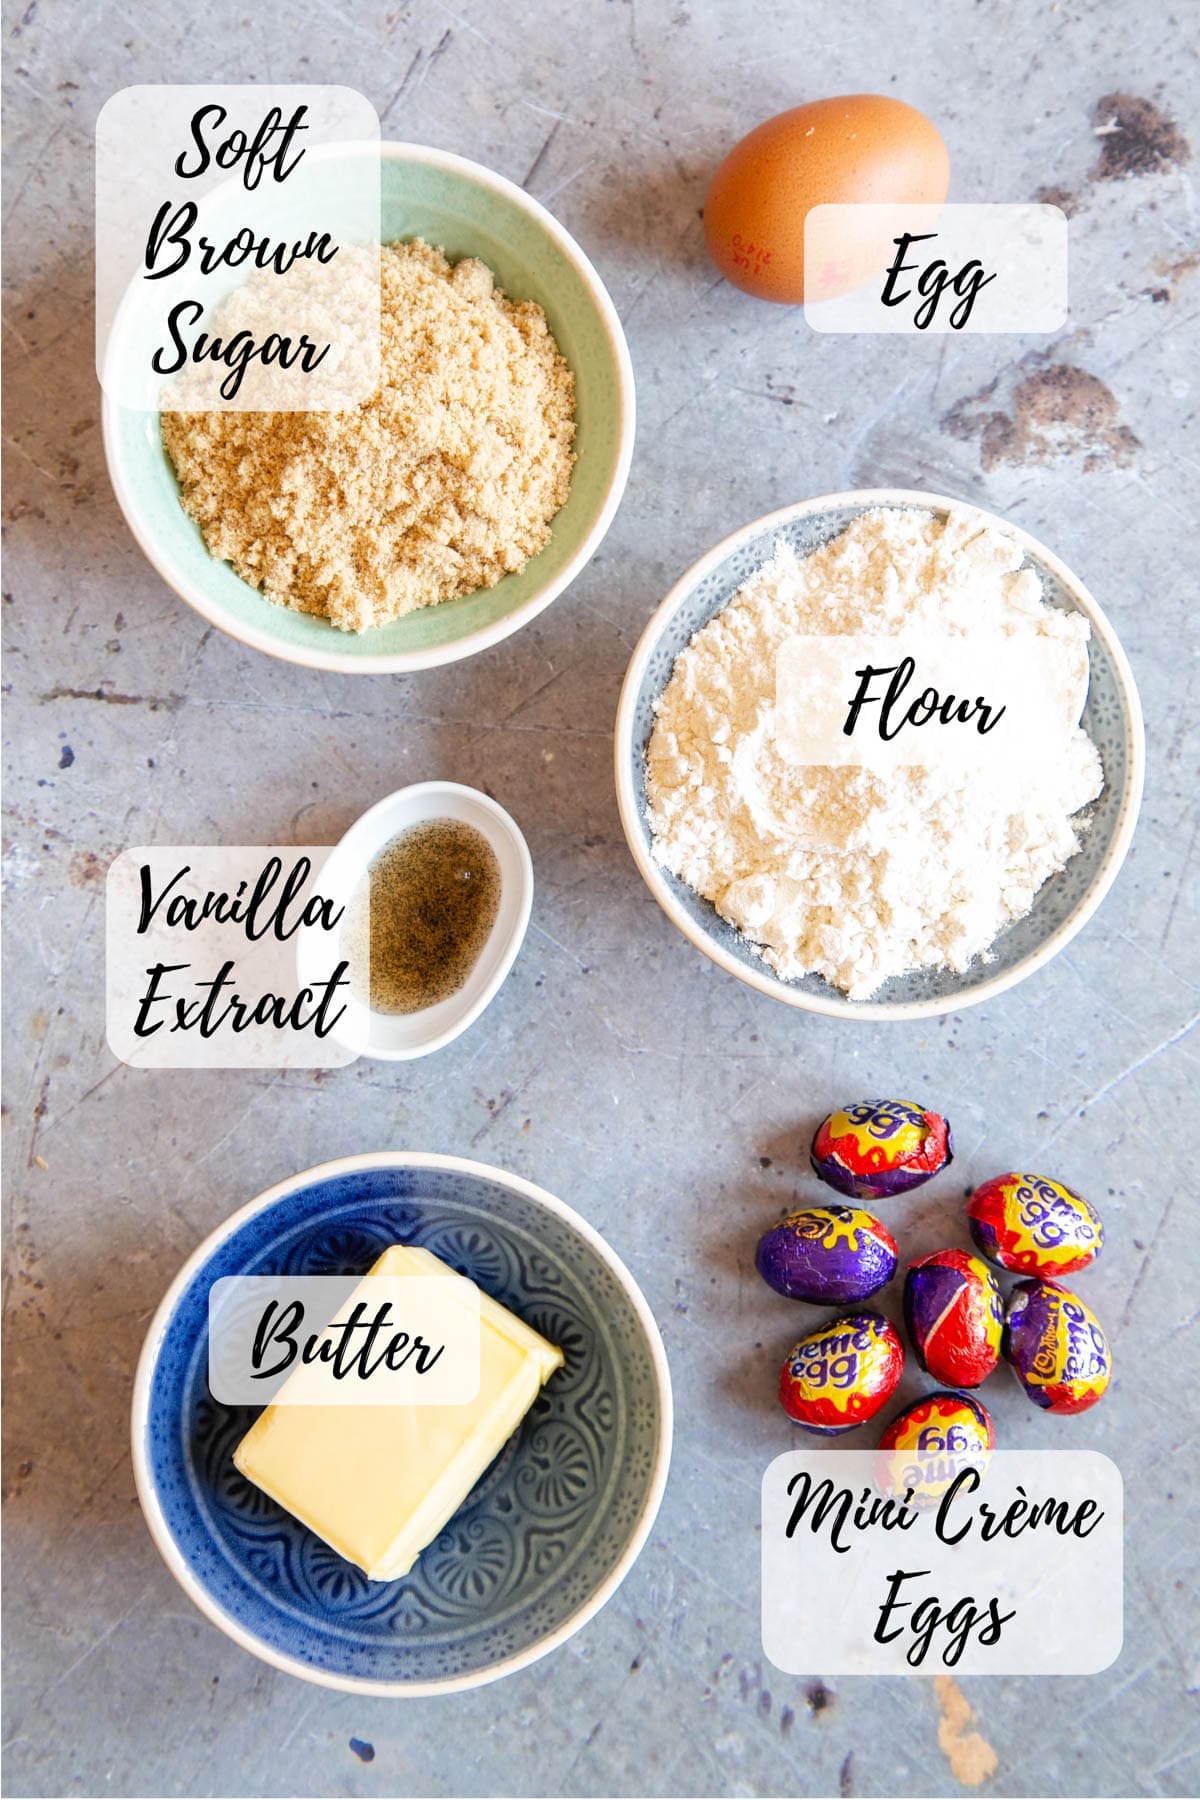 Ingredients for creme egg blondies: egg, flour, mini creme eggs, butter, vanilla extract, soft brown sugar